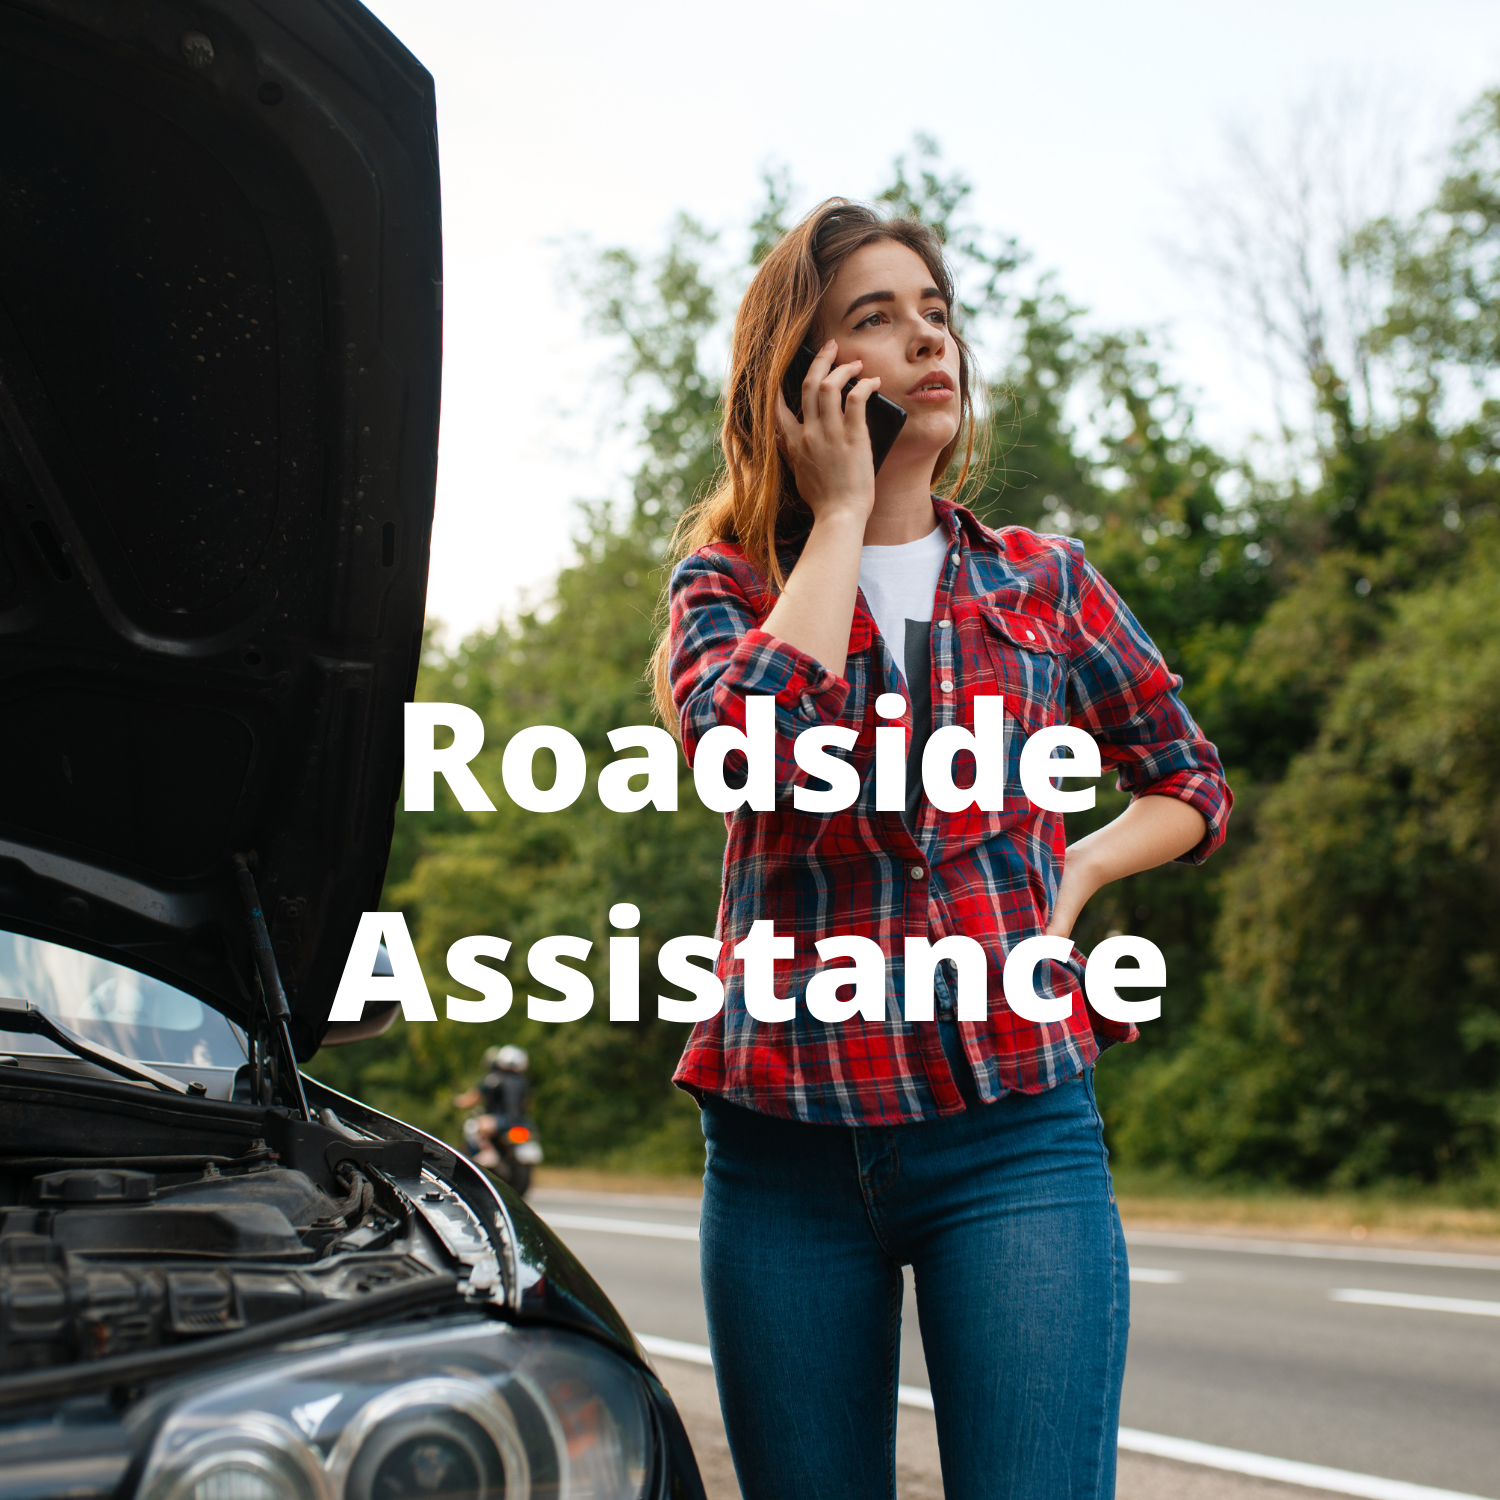 Woman talking on phone waiting for roadside assistance